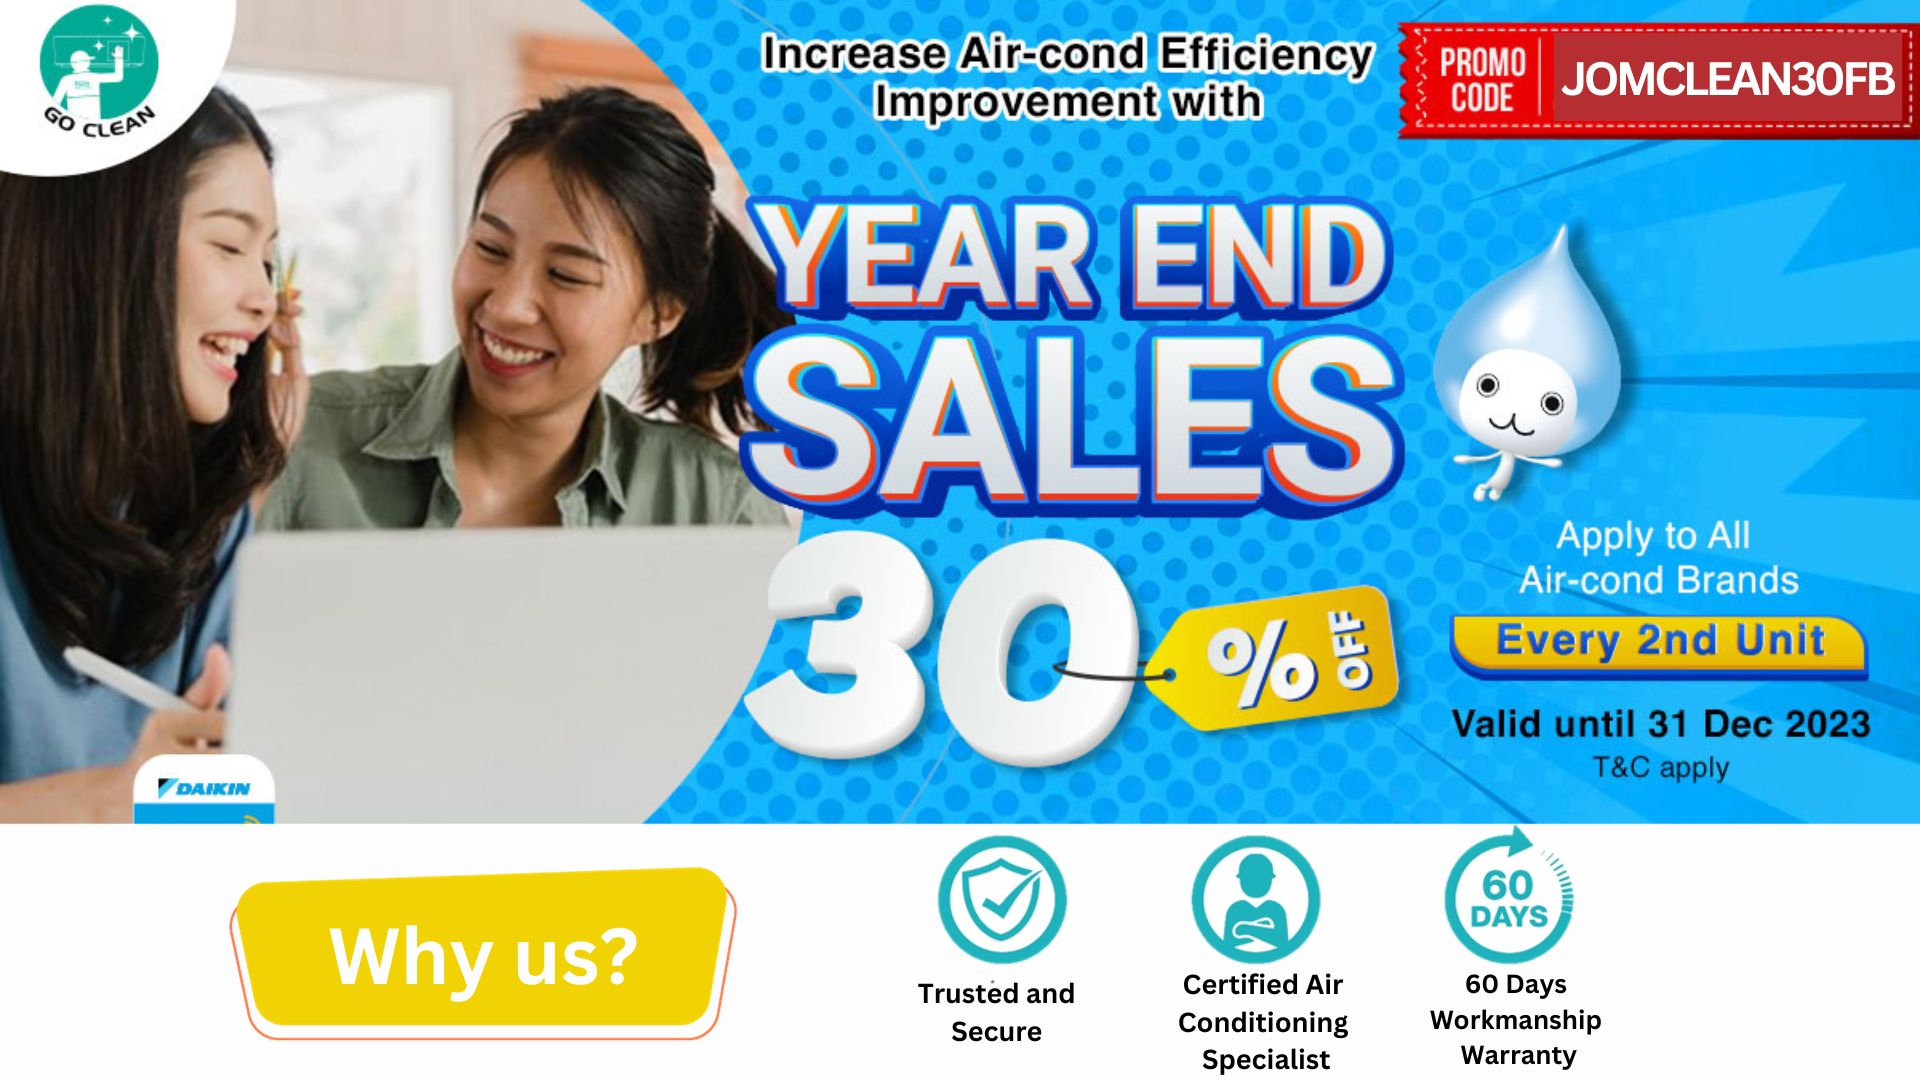 JOMCLEAN30FB Get 30% Off 2nd Unit For Every 2 Units | Daikin Malaysia